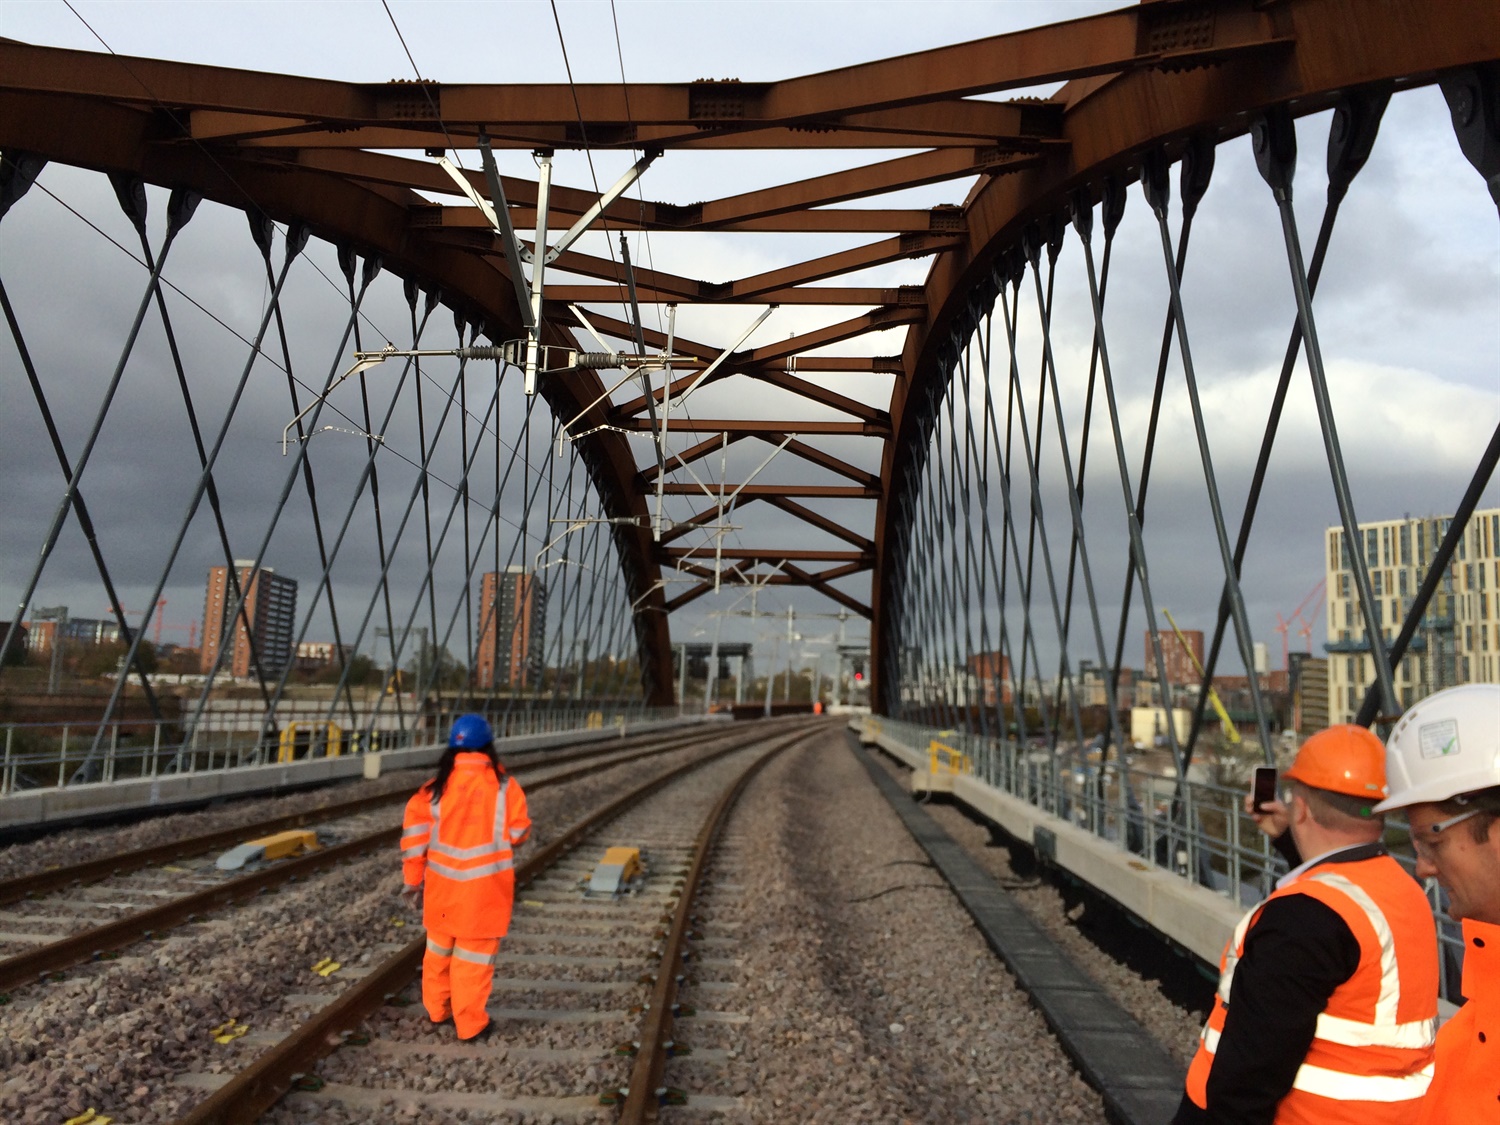 NR: Ordsall Chord shows what can be achieved with the right mechanisms in place